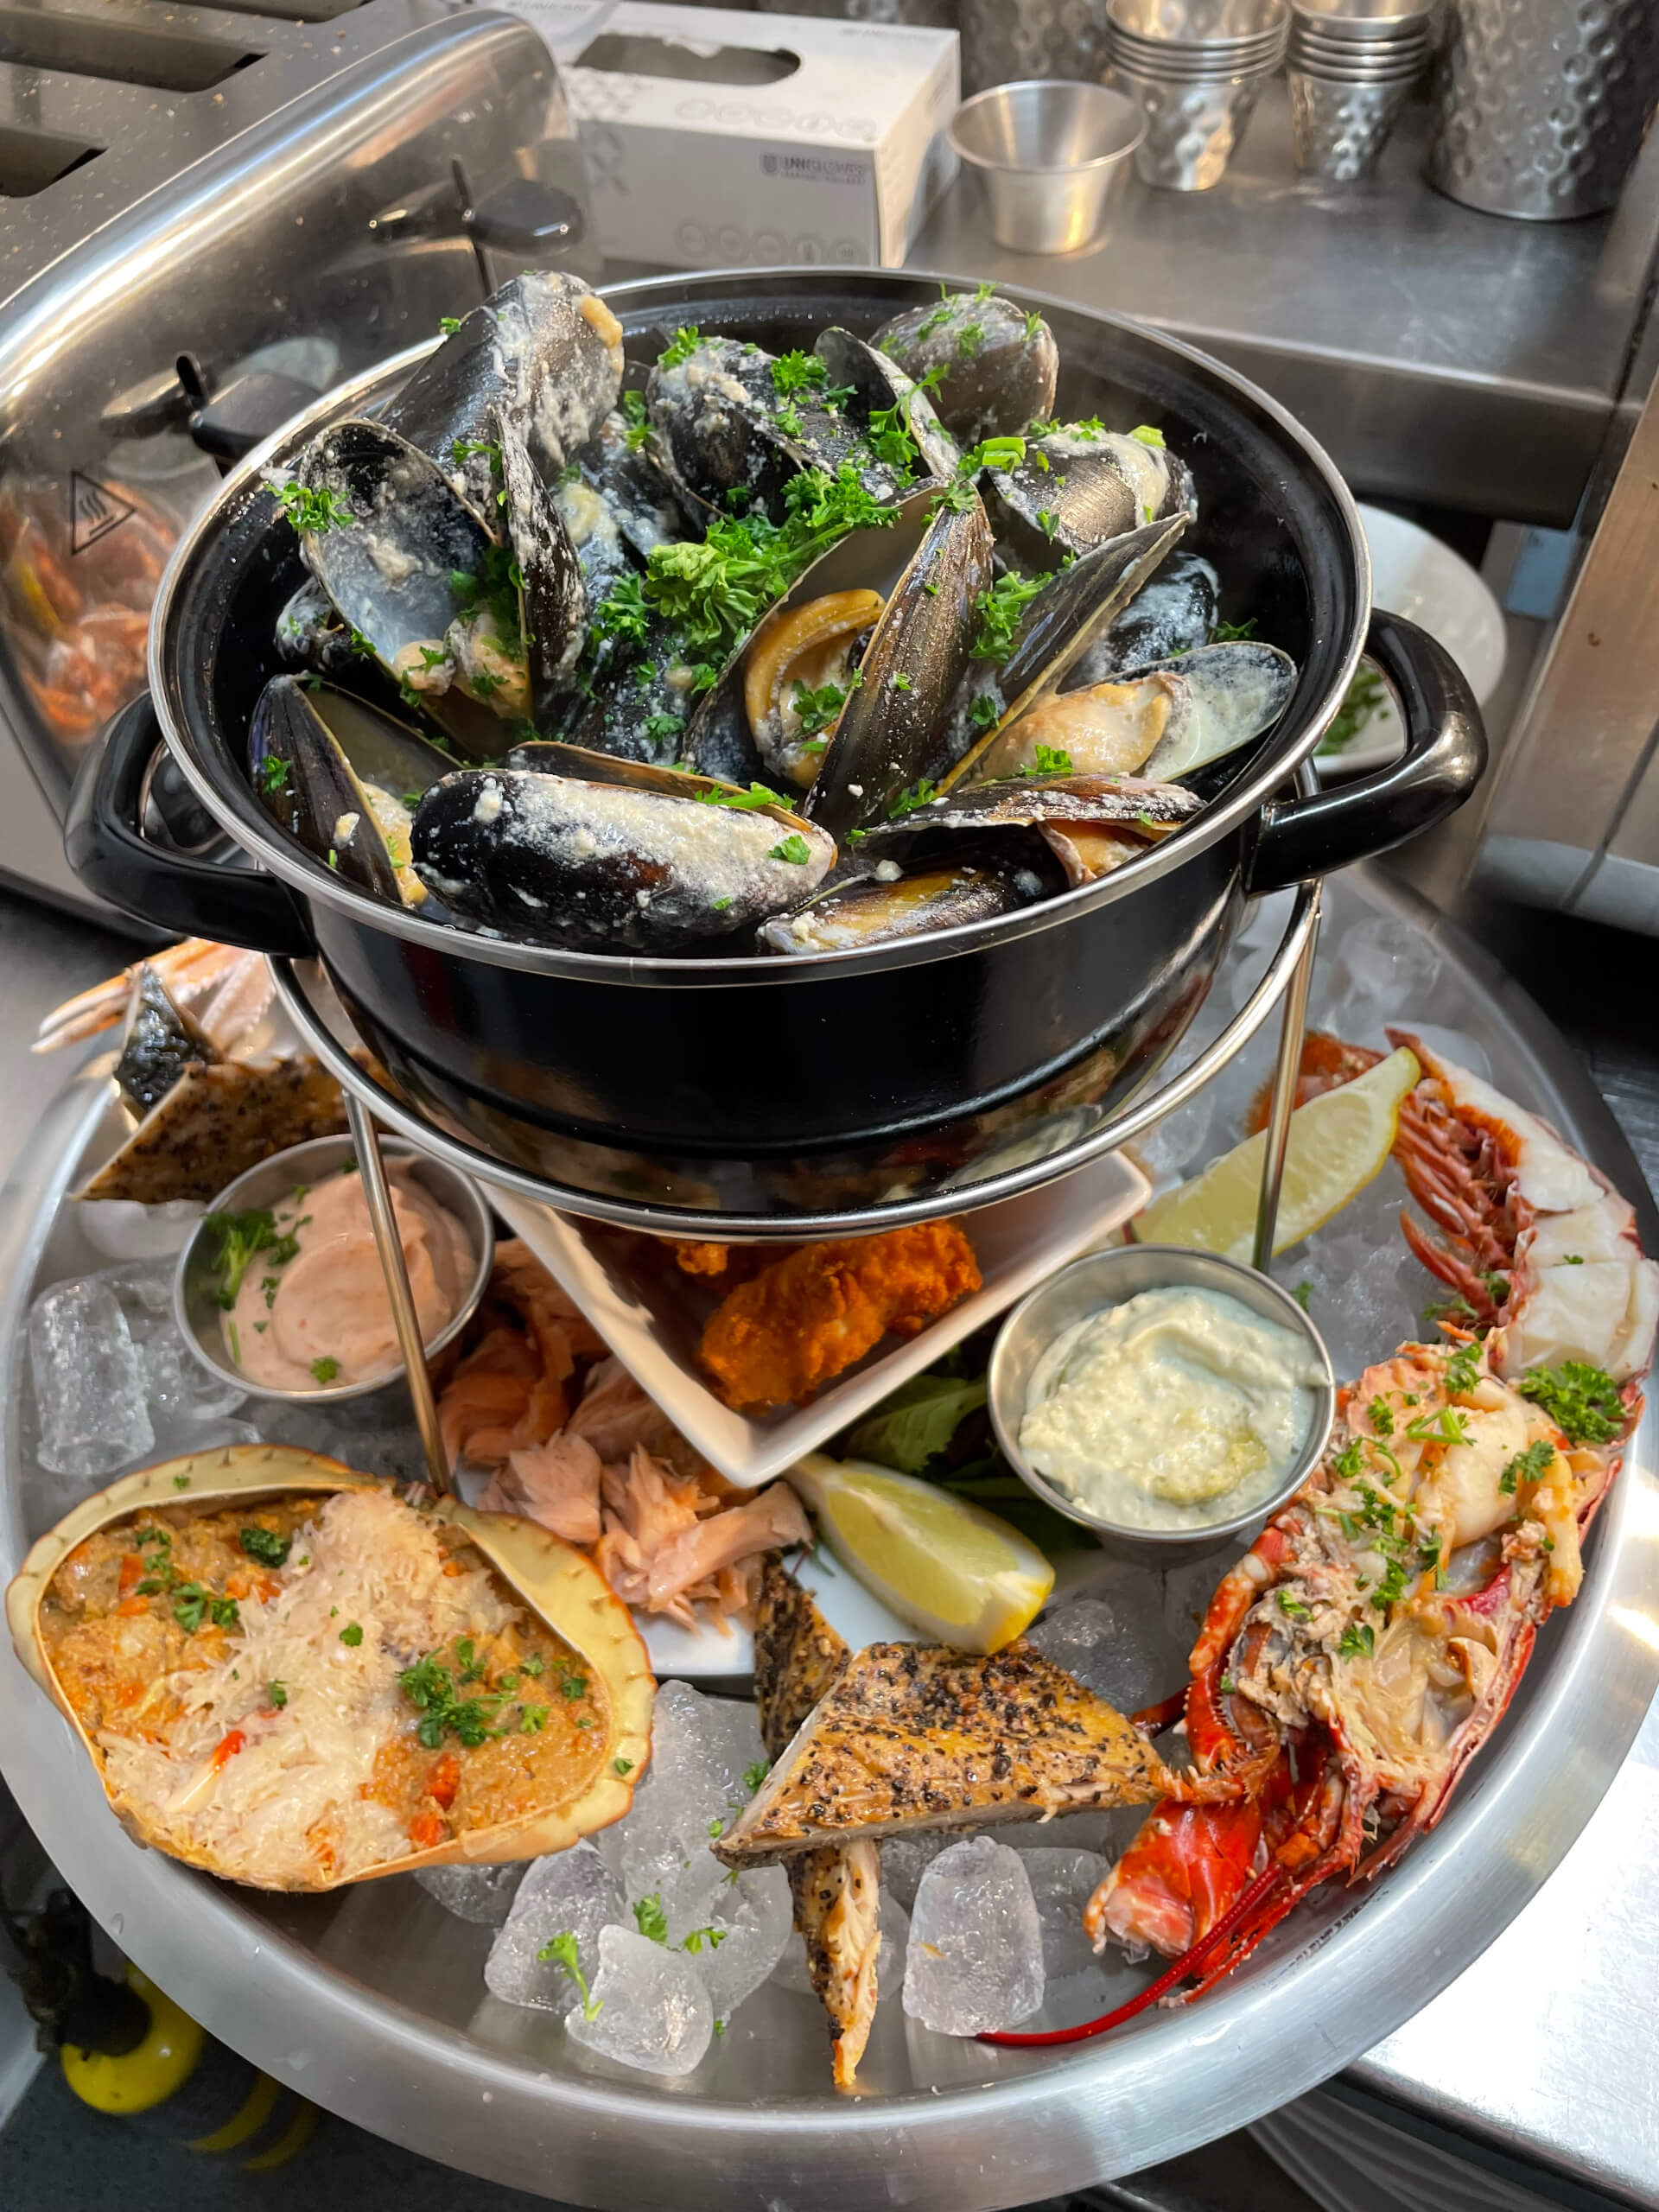 Our Magnificent Seafood Tower for 2!